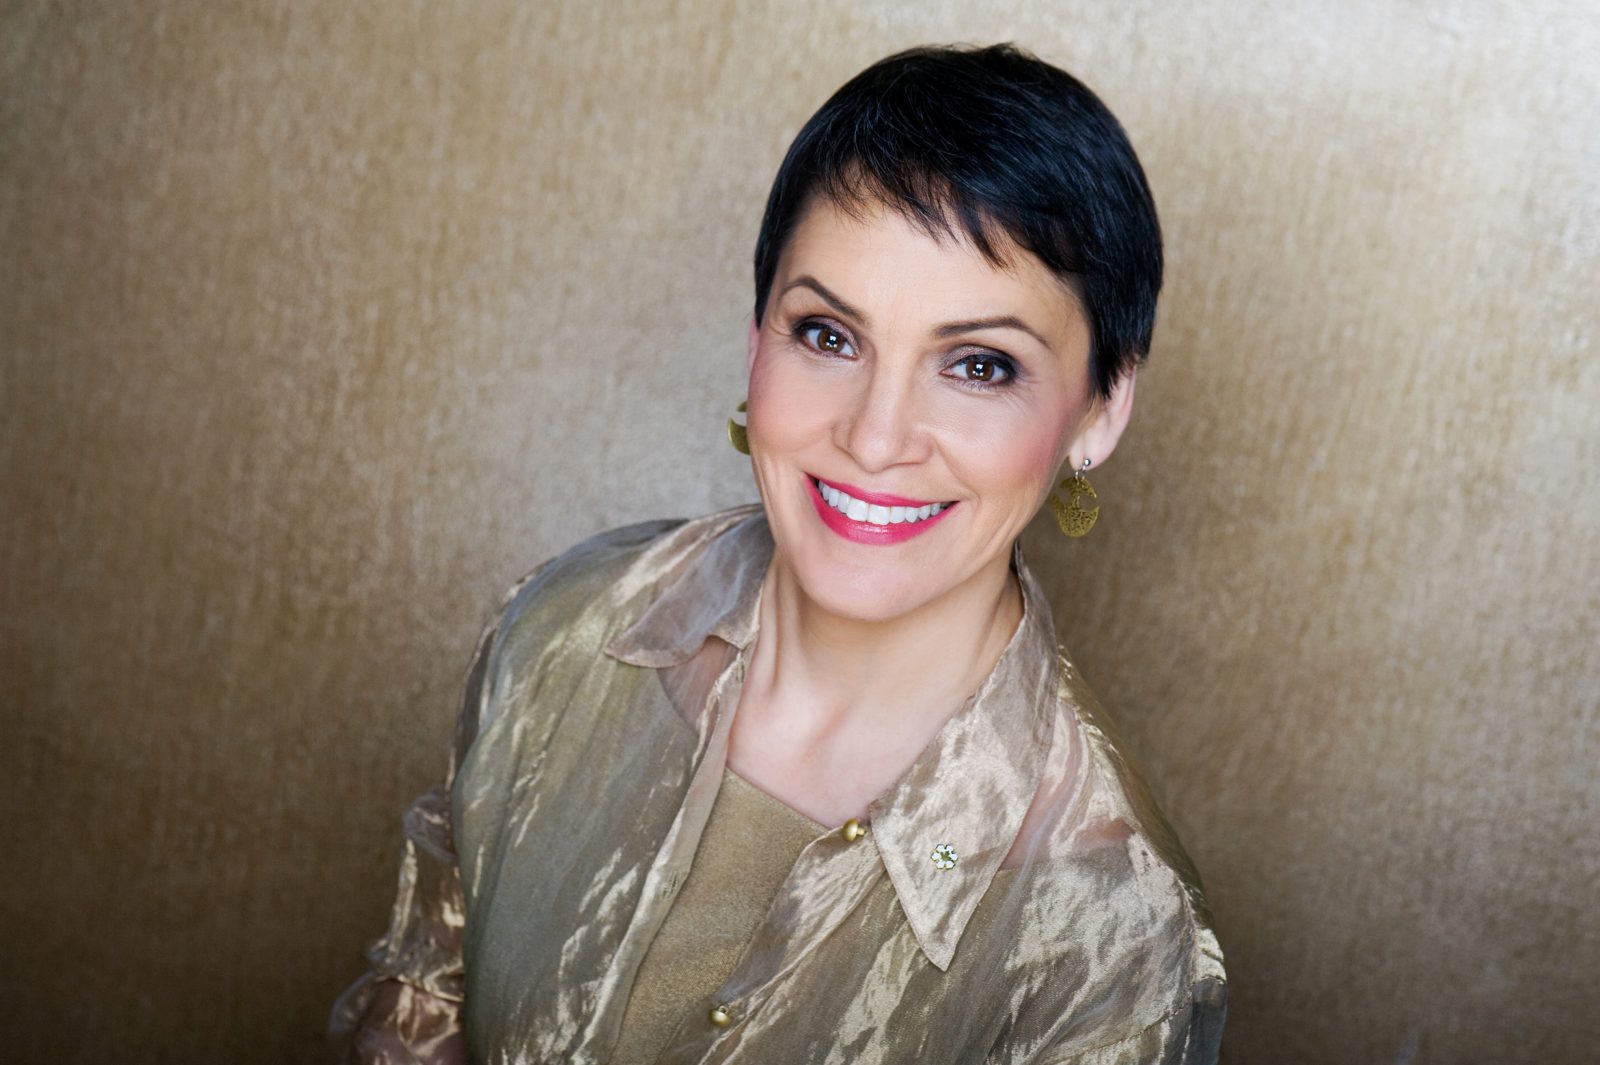 Aglukark to take to Aultsville stage Nov. 16